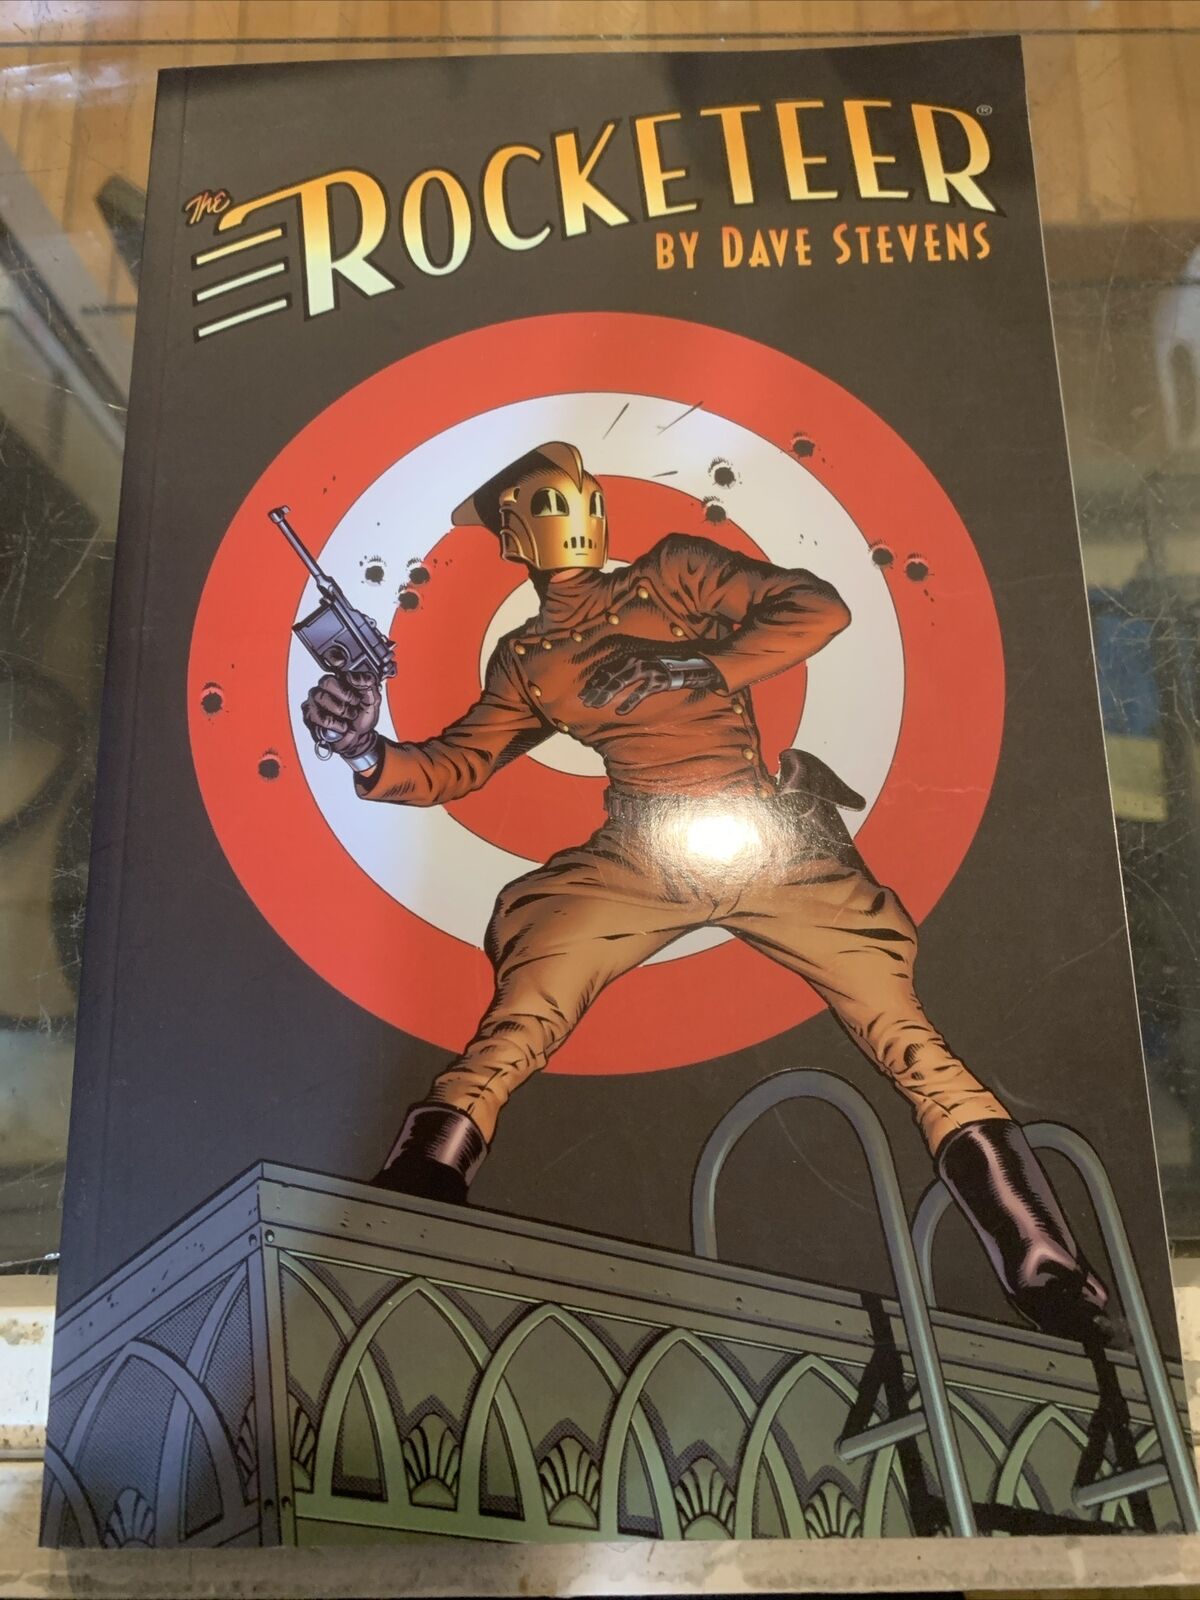 The Rocketeer: The Complete Adventures (IDW Publishing, February 2015)